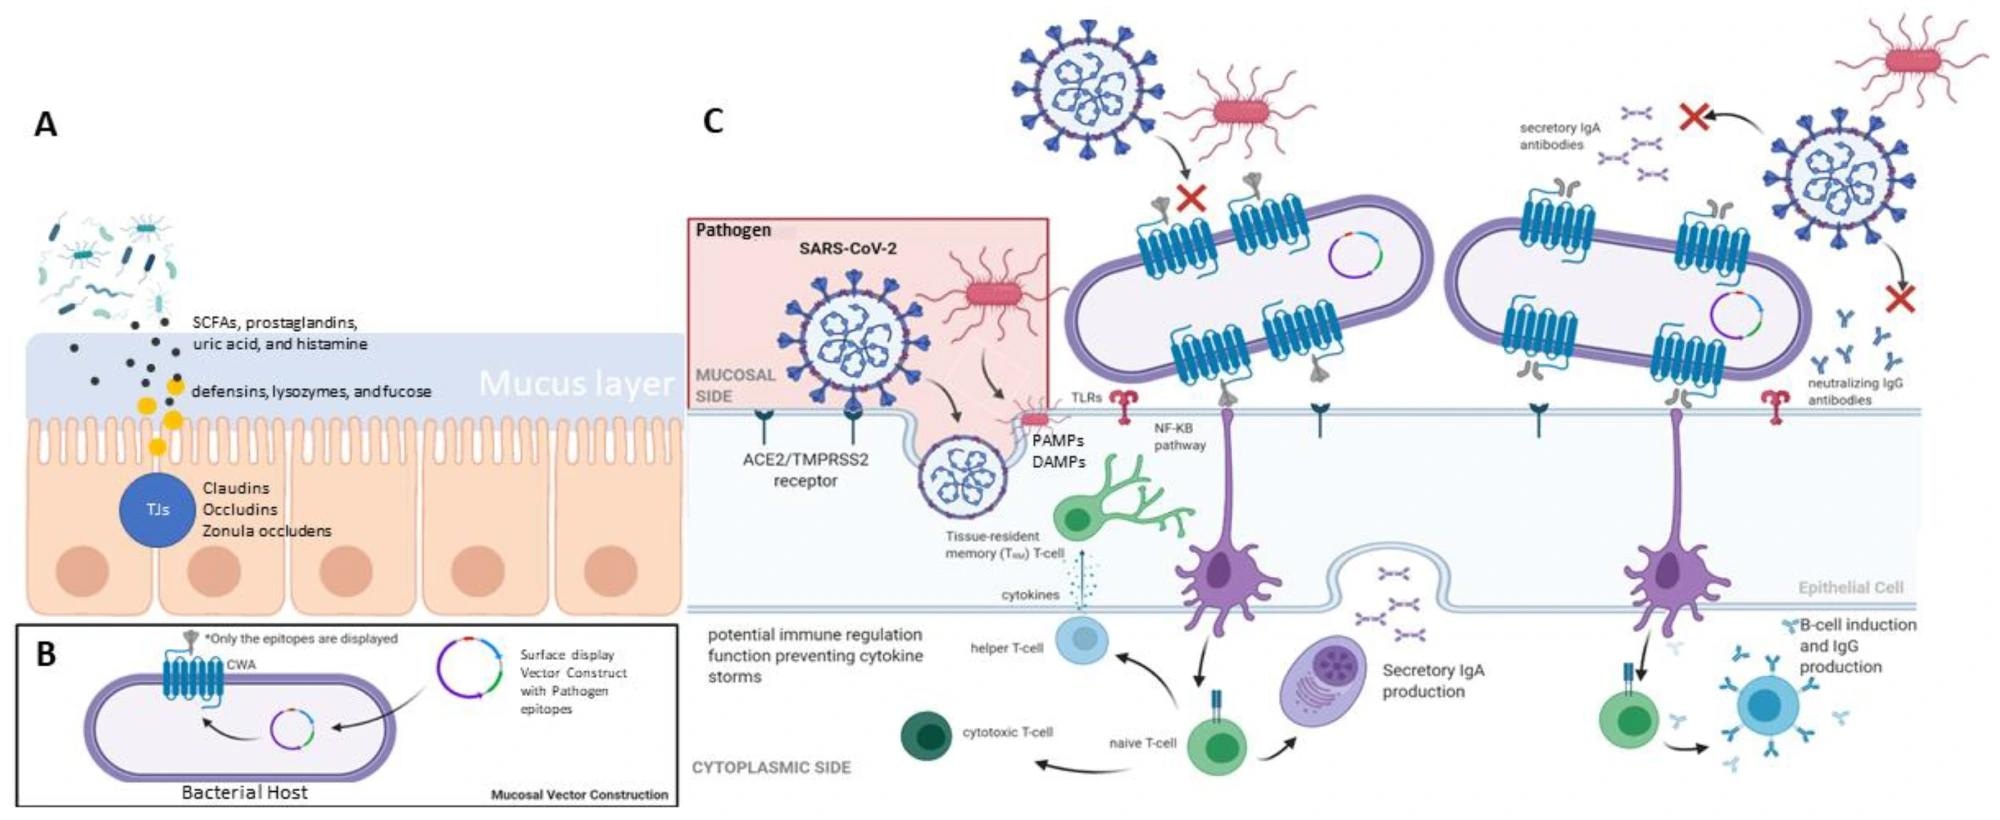 Summary of mucosal-associated immunity in human (a) gut barrier system, (b) mucosal vector construct, and (c) mucosal response elicited by immune cells.